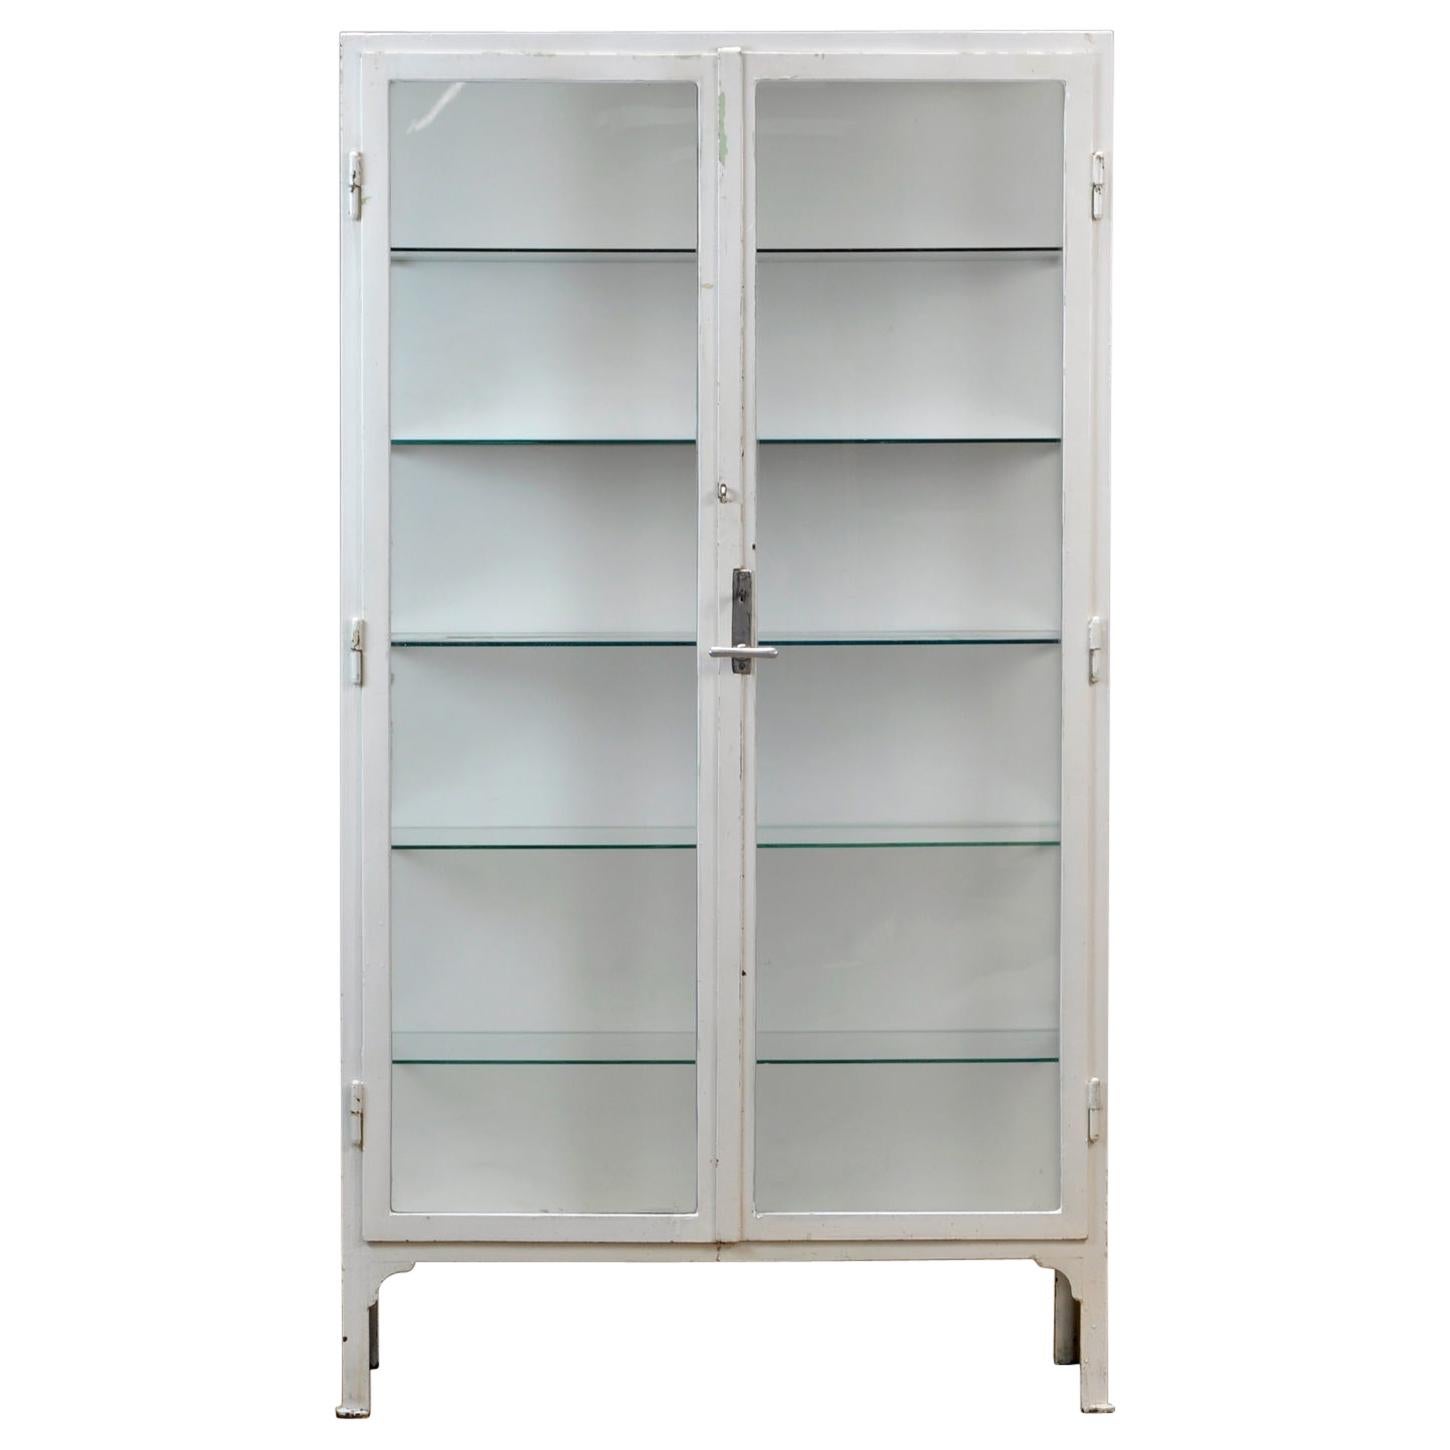 Vintage Steel and Glass Medical Cabinet, 1940s at 1stDibs